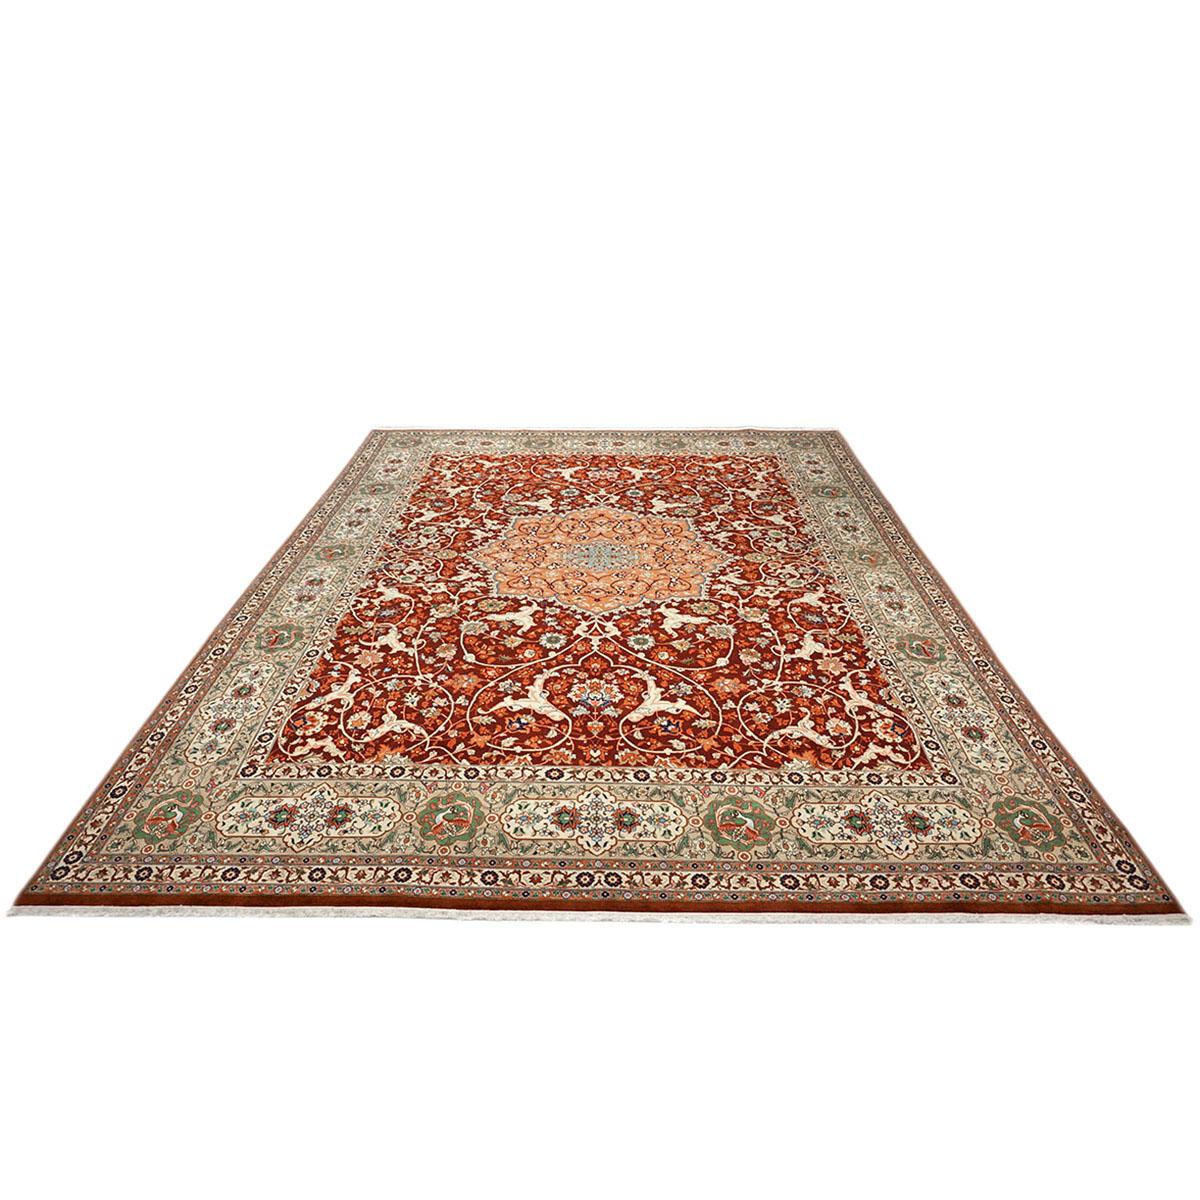 Ashly fine rugs presents a 1940s Antique Persian Tabriz. Tabriz is a northern city in modern-day Iran and has forever been famous for the fineness and craftsmanship of its handmade rugs. This piece has a dark red-colored background, with the design,